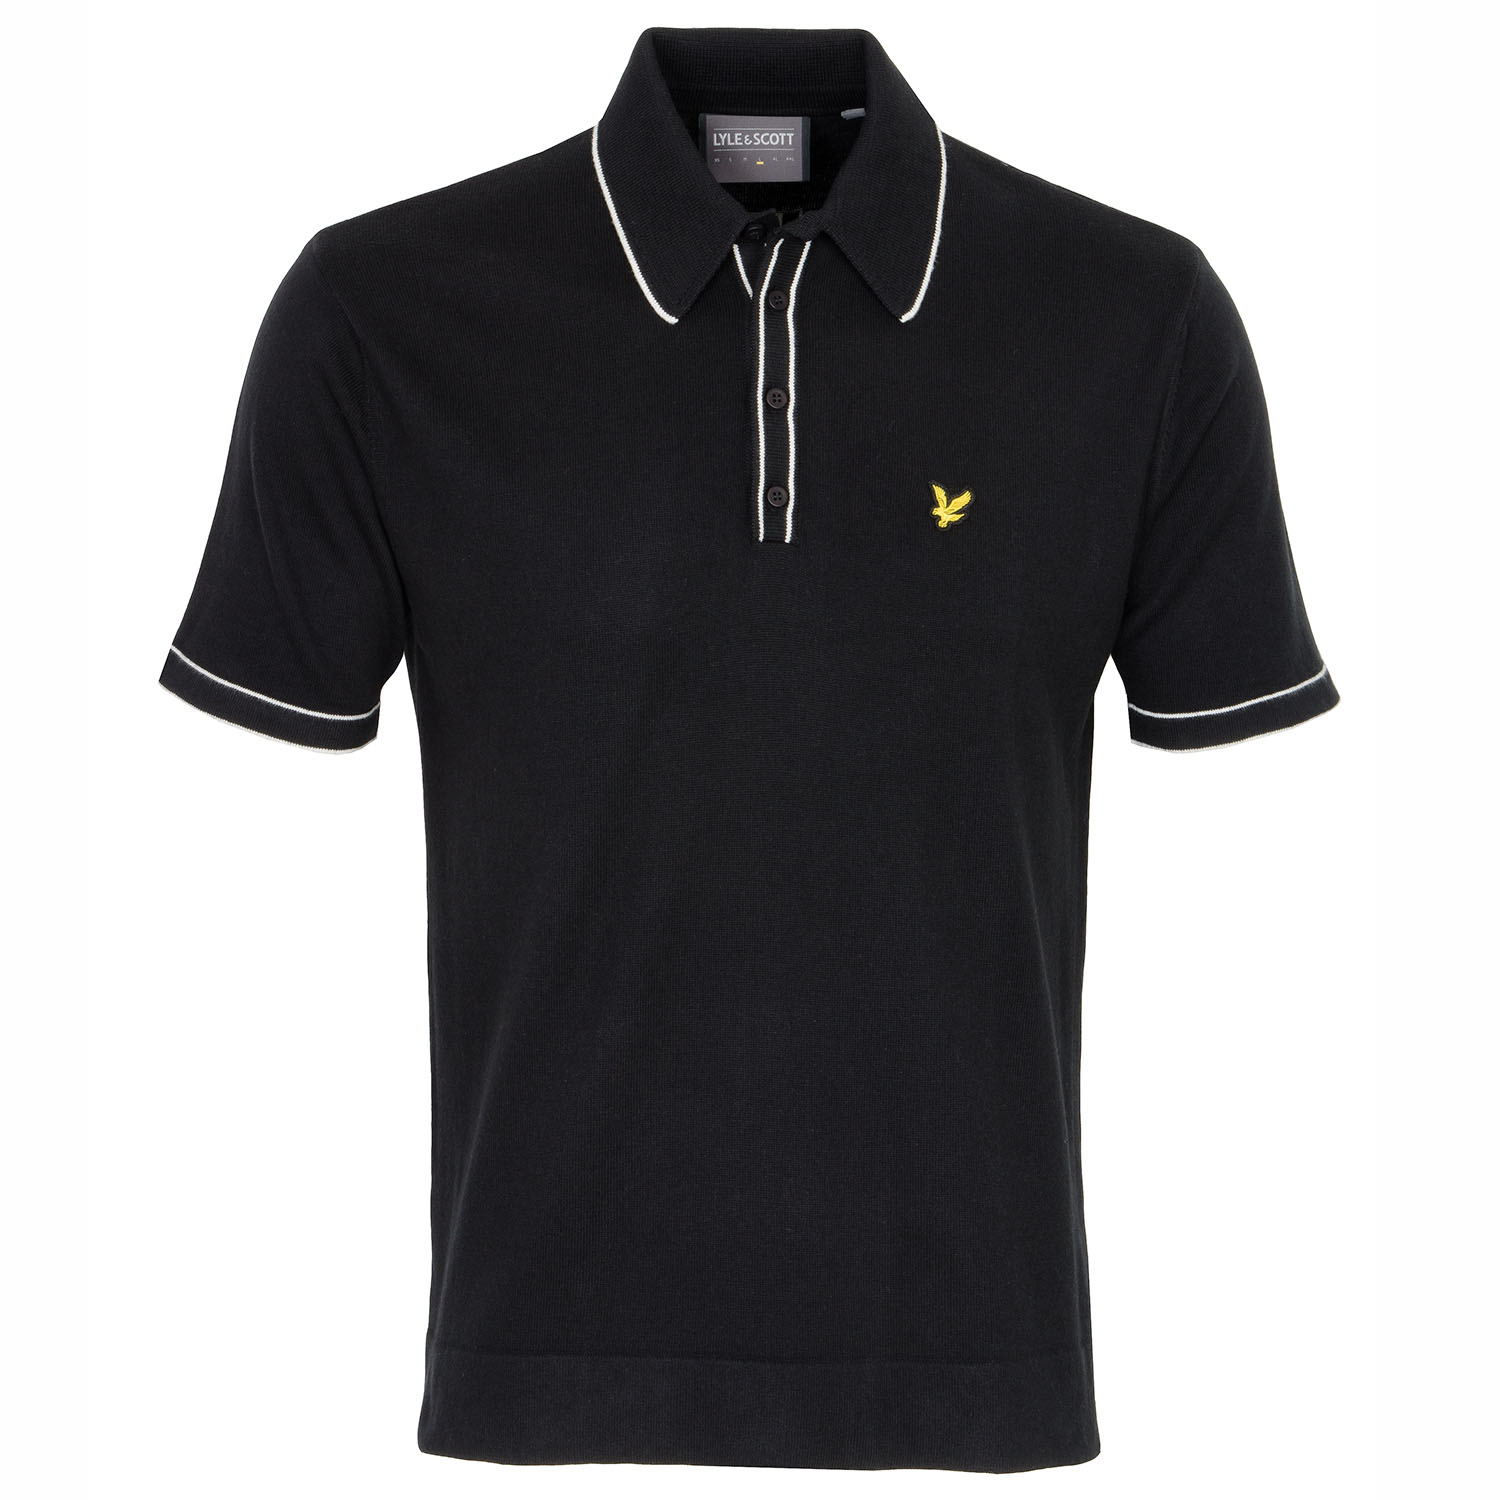 Lyle & Scott Knitted Branded Golf Polo Shirt